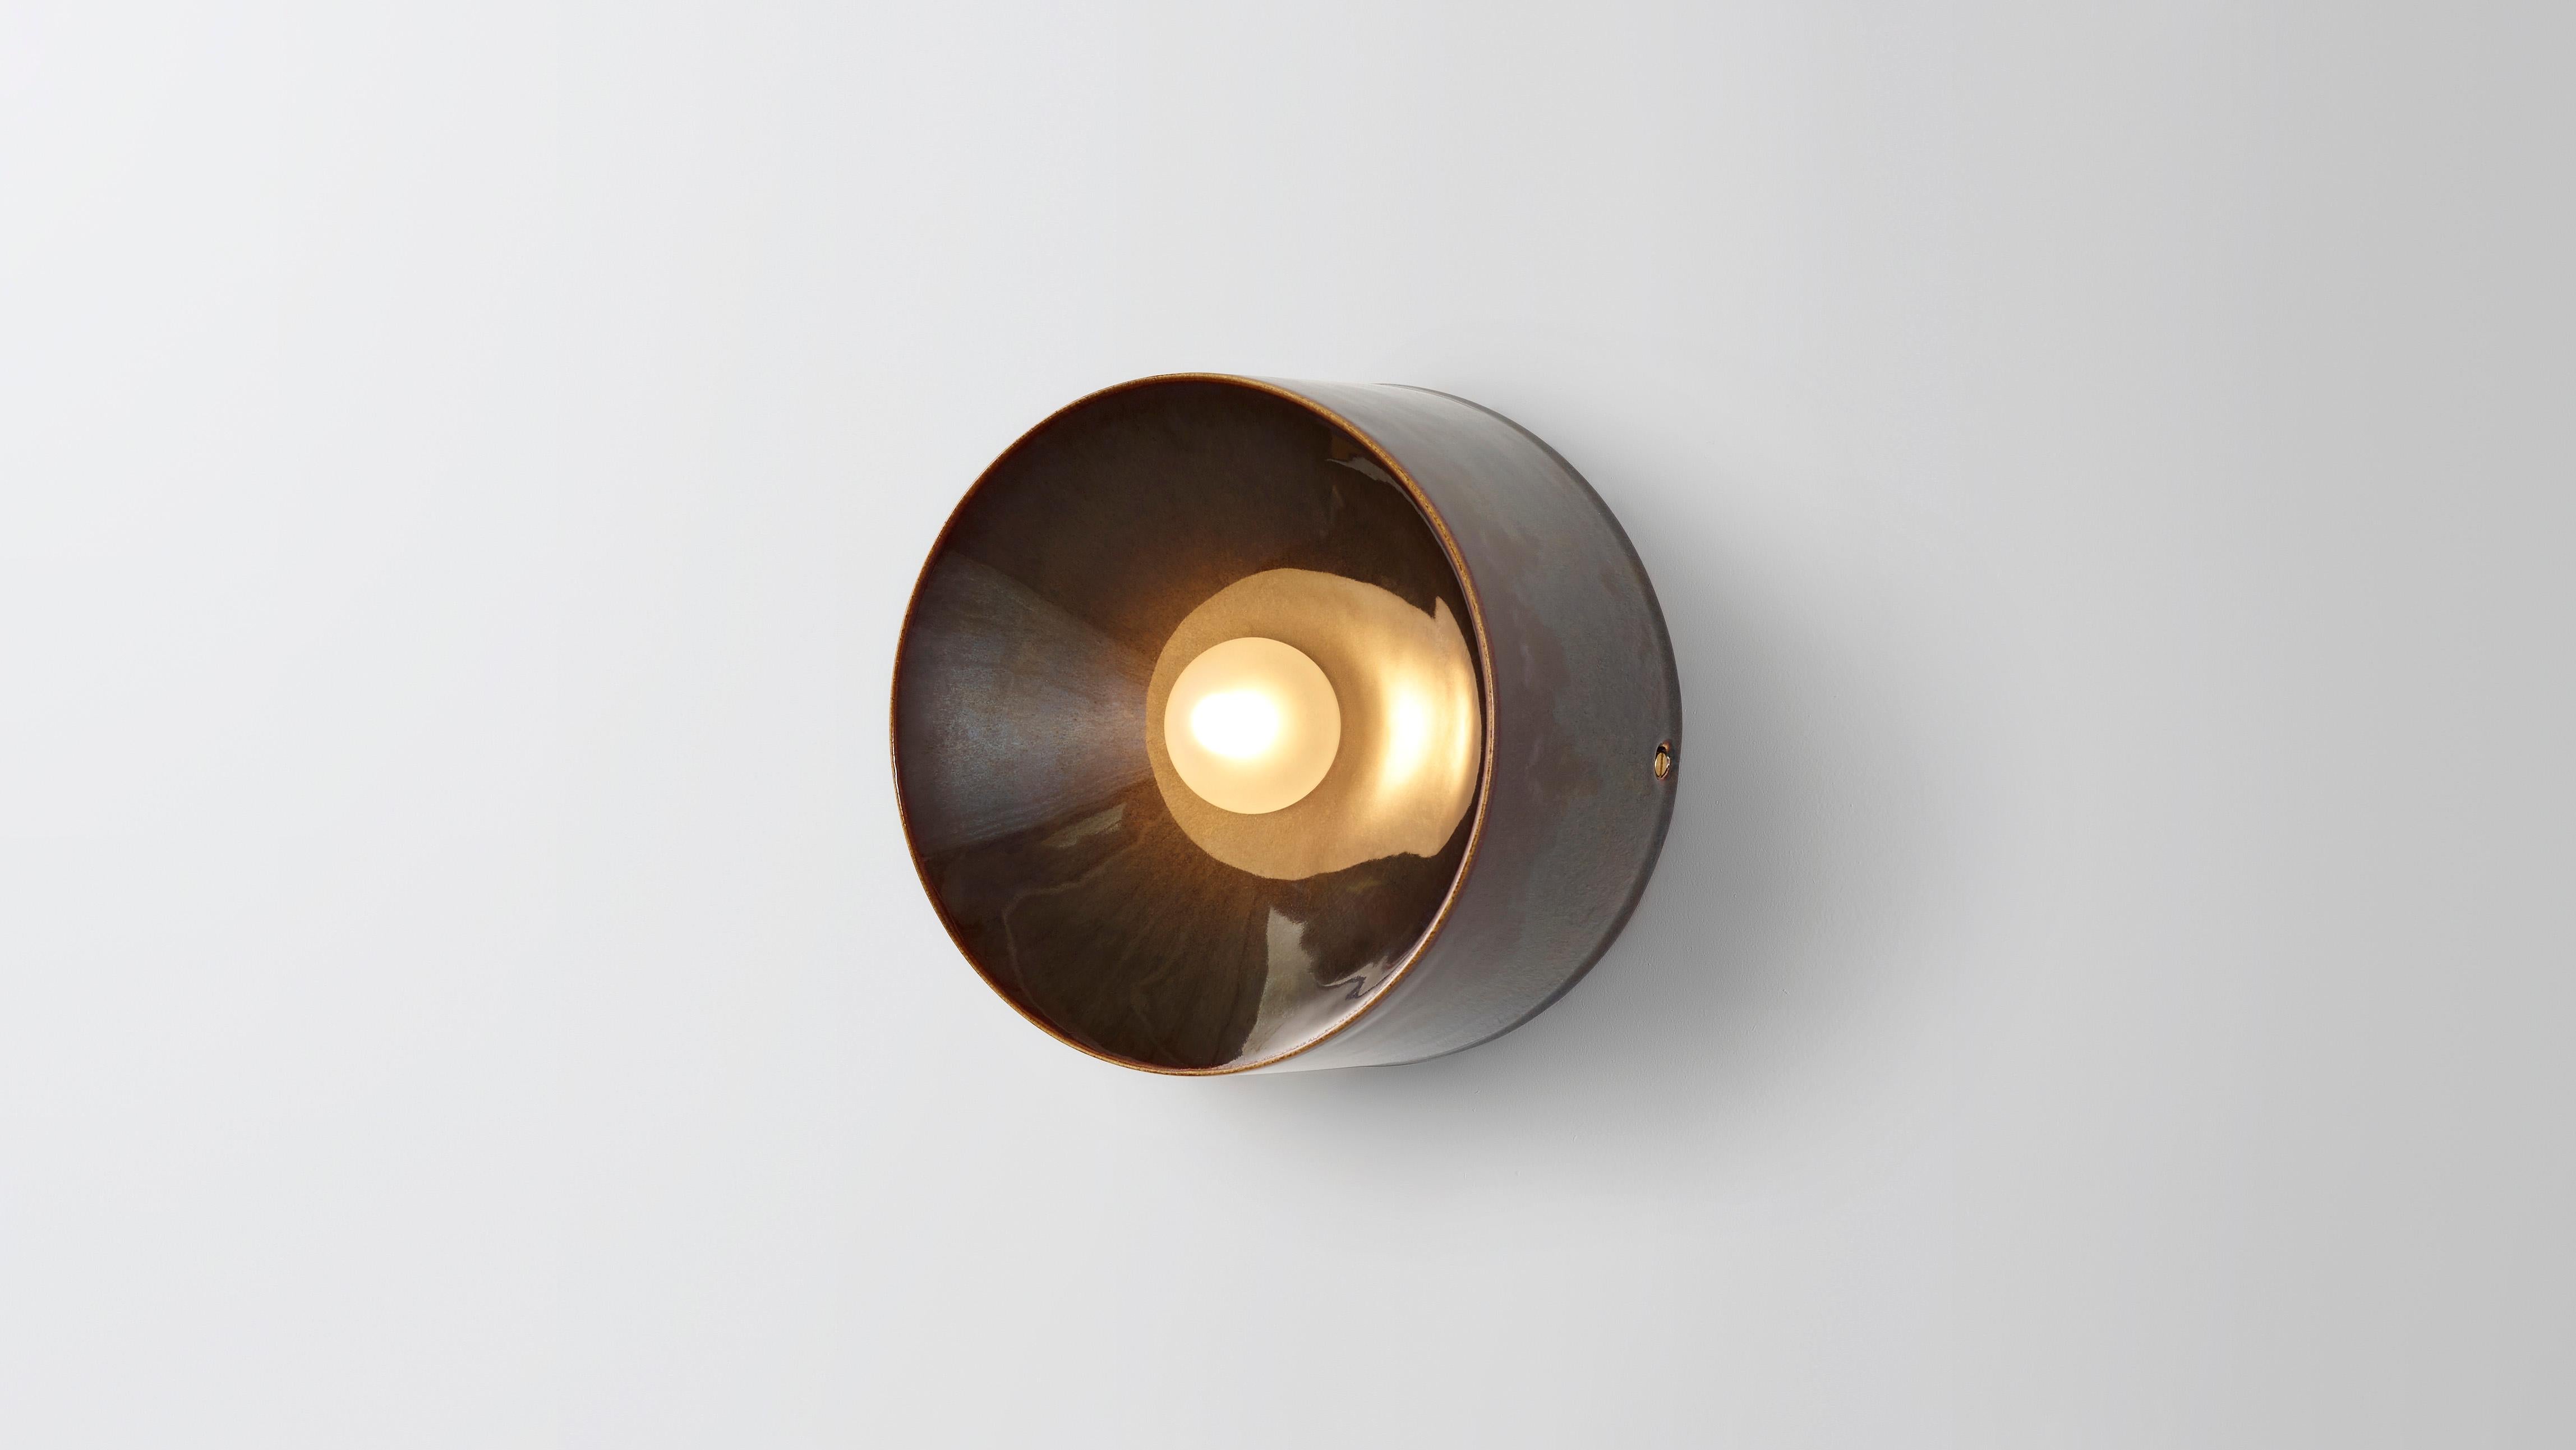 Anton in brown ceramic by Volker Haug 
Anton series
Dimensions: W 18 H 18 D 10.3 cm
Materials: Cast Ceramic
Glaze: Brown
Lamp: G9 LED (240V / 120V US). 12V option available
Glass Bulb : 4.5 cm ø, Frosted
Weight : 1.5kg

Form follows force. The Anton